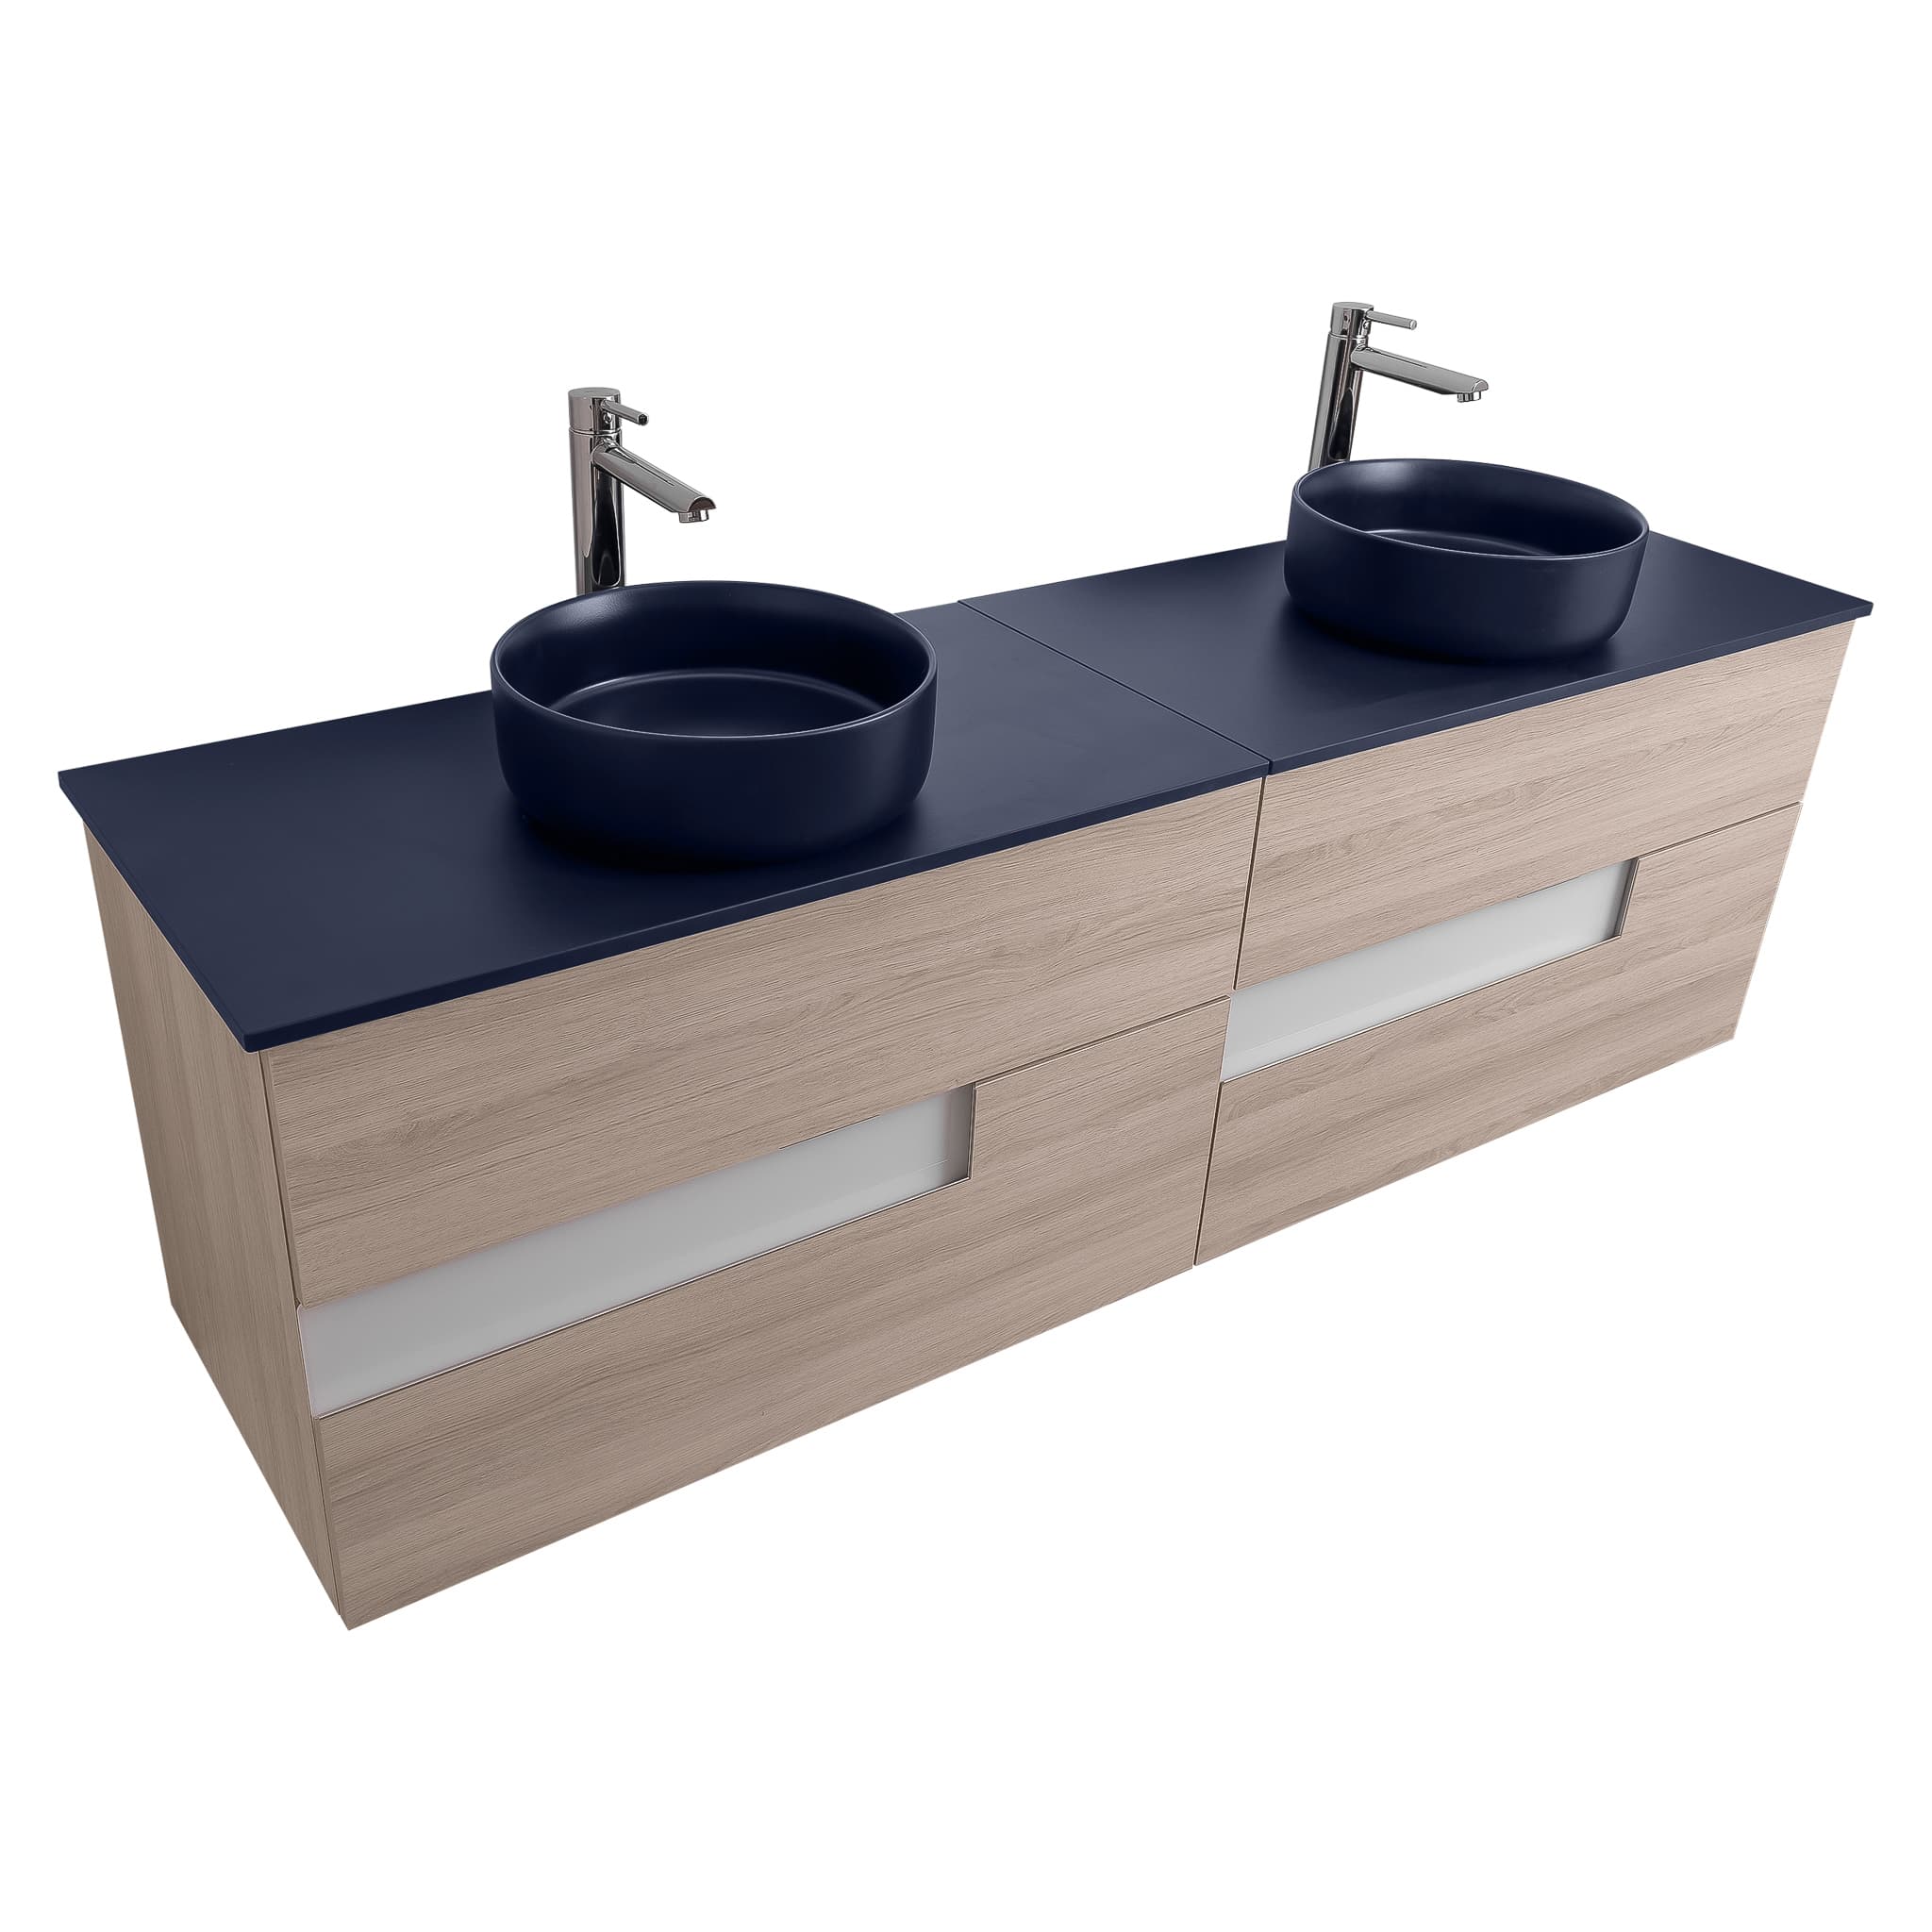 Vision 63 Natural Light Wood Cabinet, Ares Navy Blue Top And Two Ares Navy Blue Ceramic Basin, Wall Mounted Modern Vanity Set